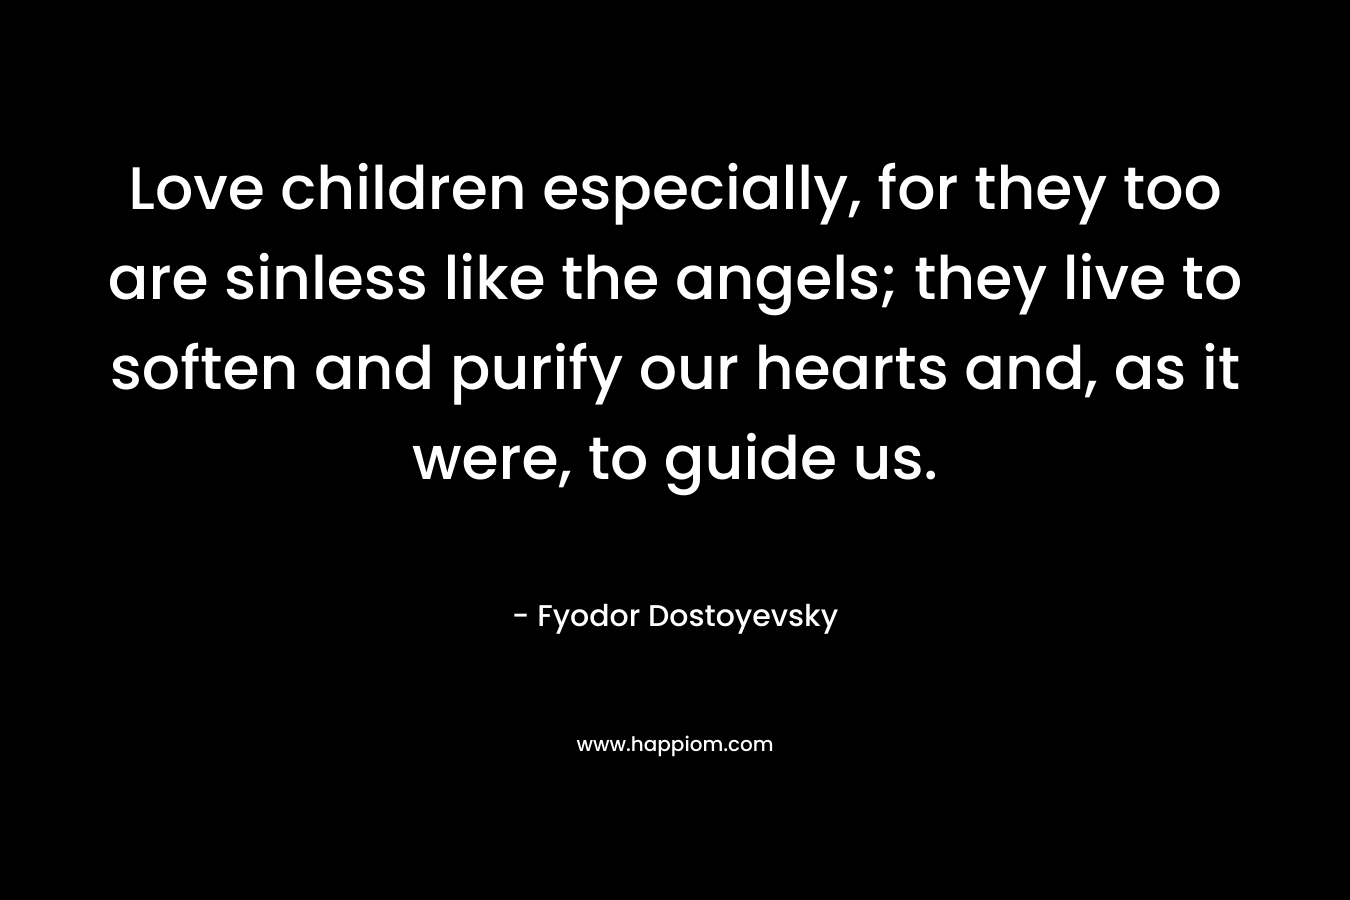 Love children especially, for they too are sinless like the angels; they live to soften and purify our hearts and, as it were, to guide us. – Fyodor Dostoyevsky